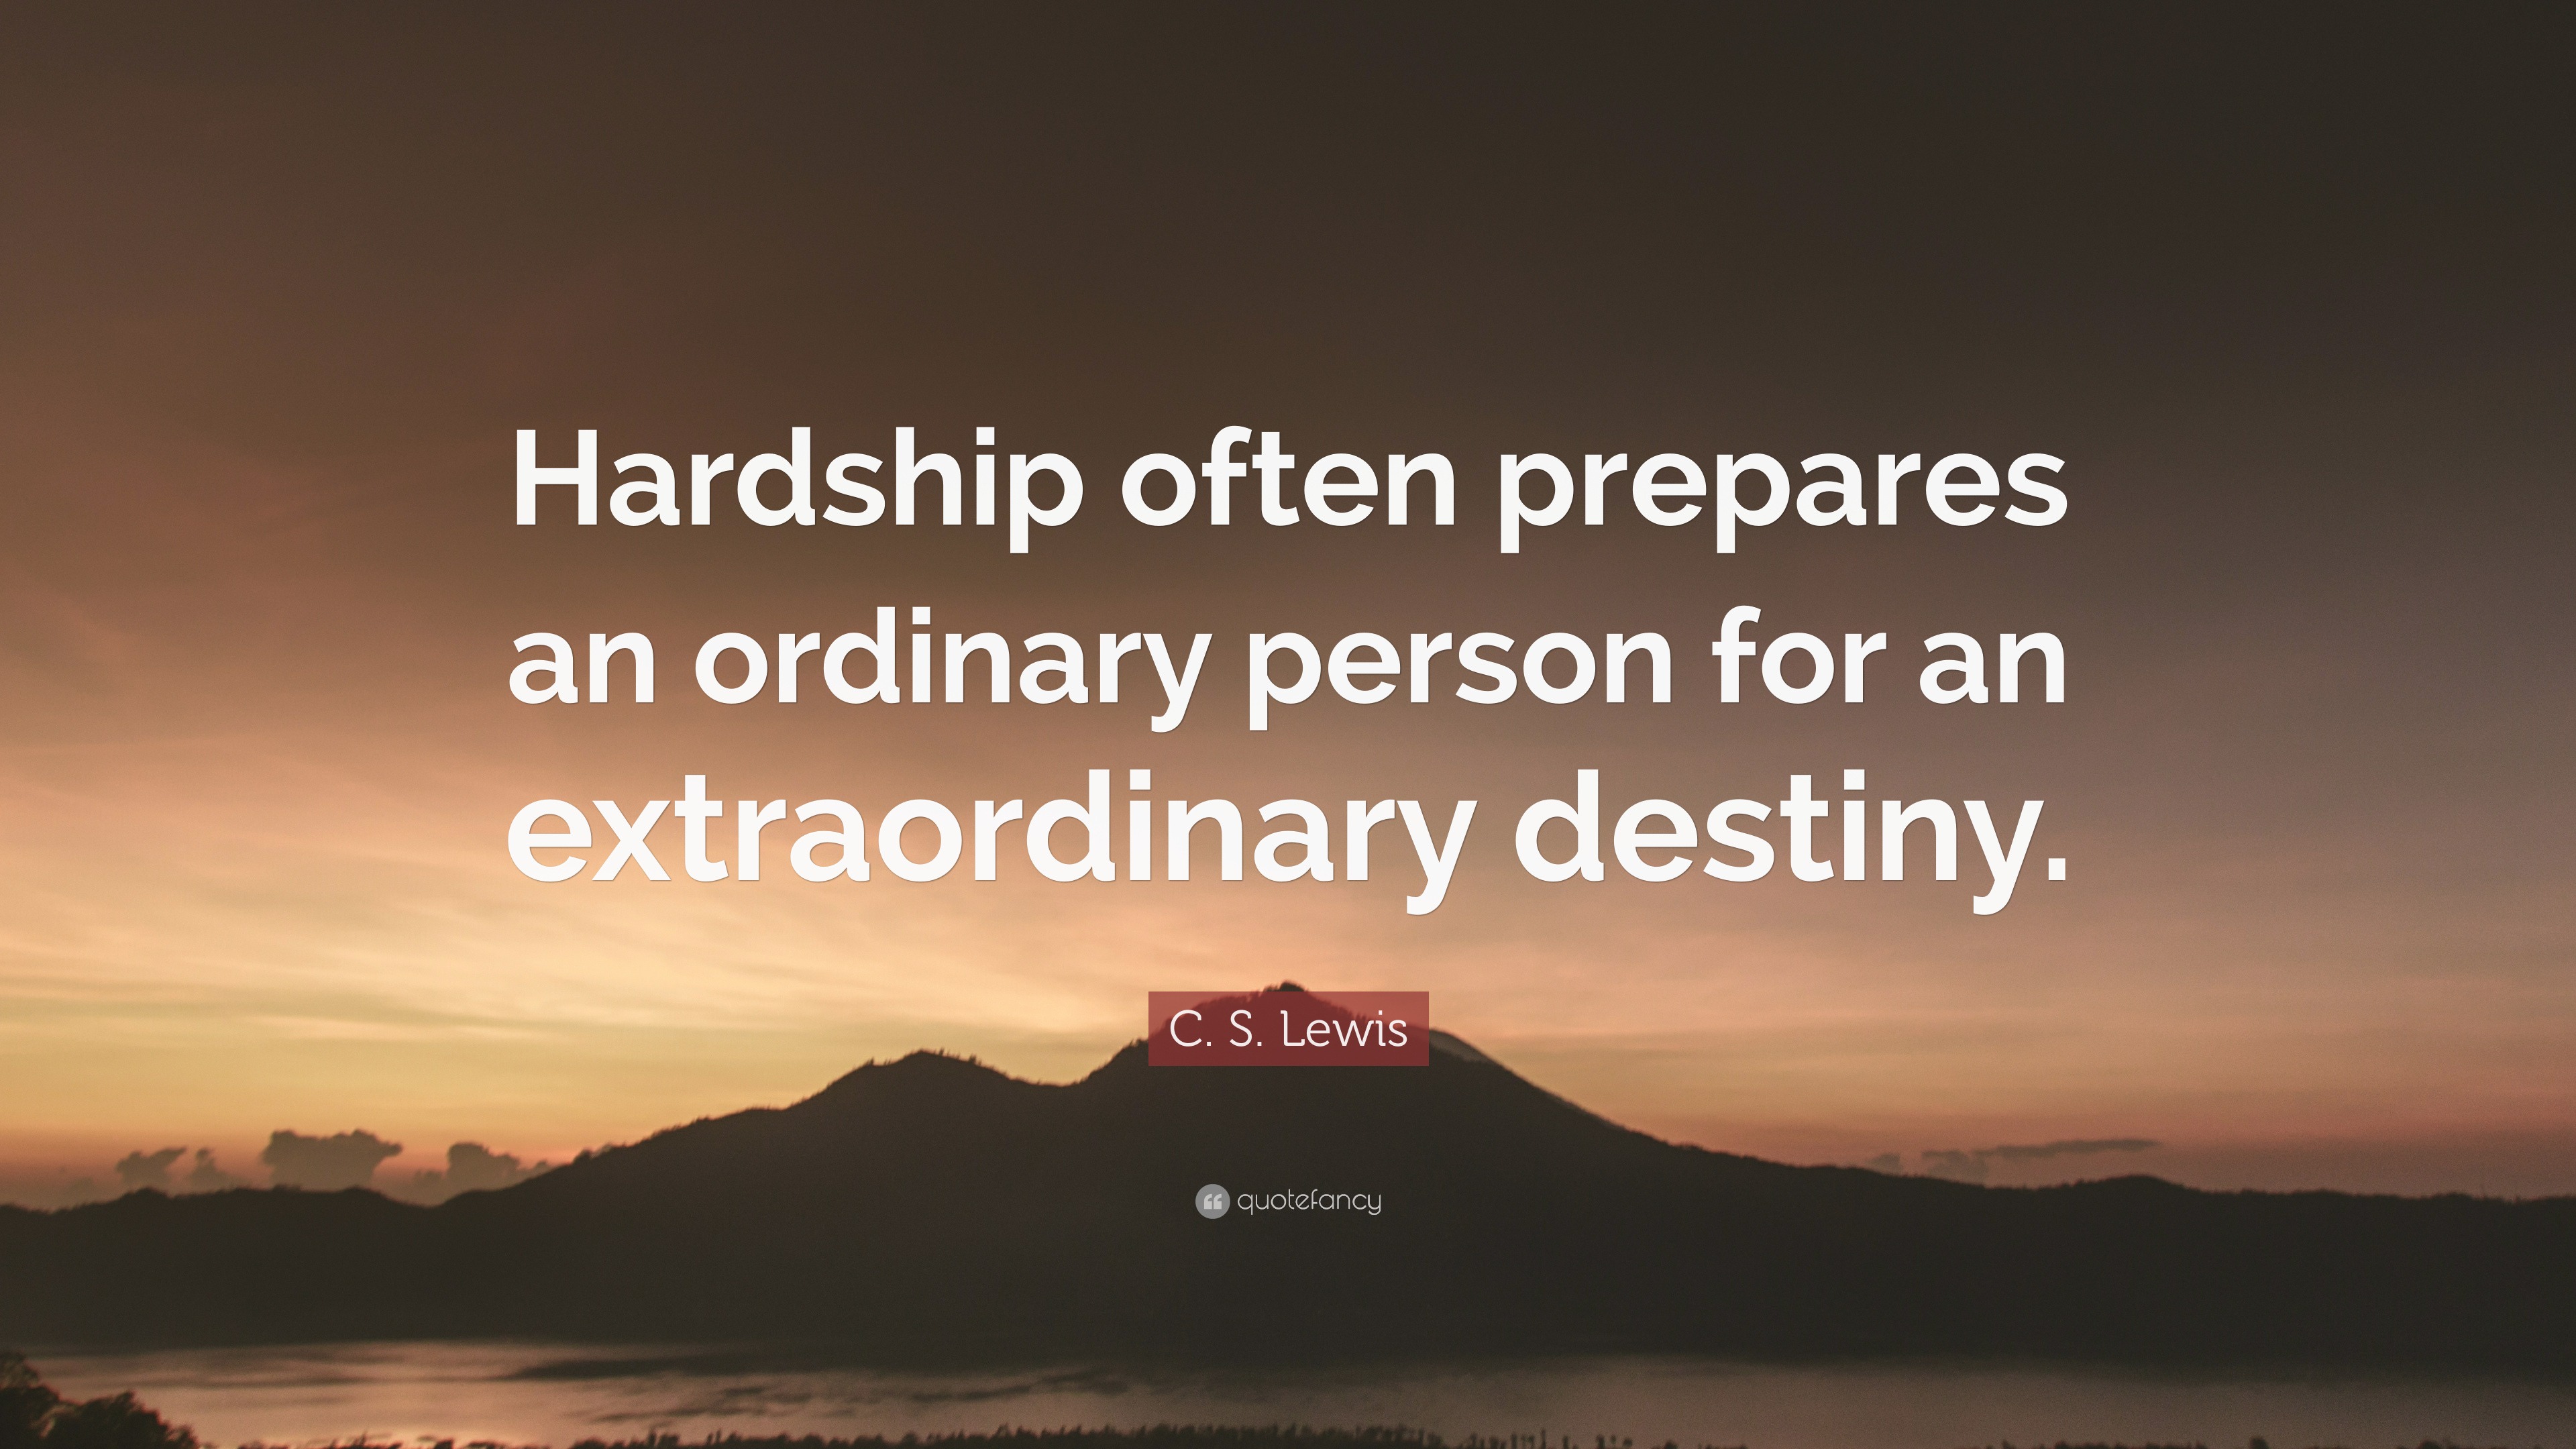 C. S. Lewis Quote: “Hardship often prepares an ordinary person for an